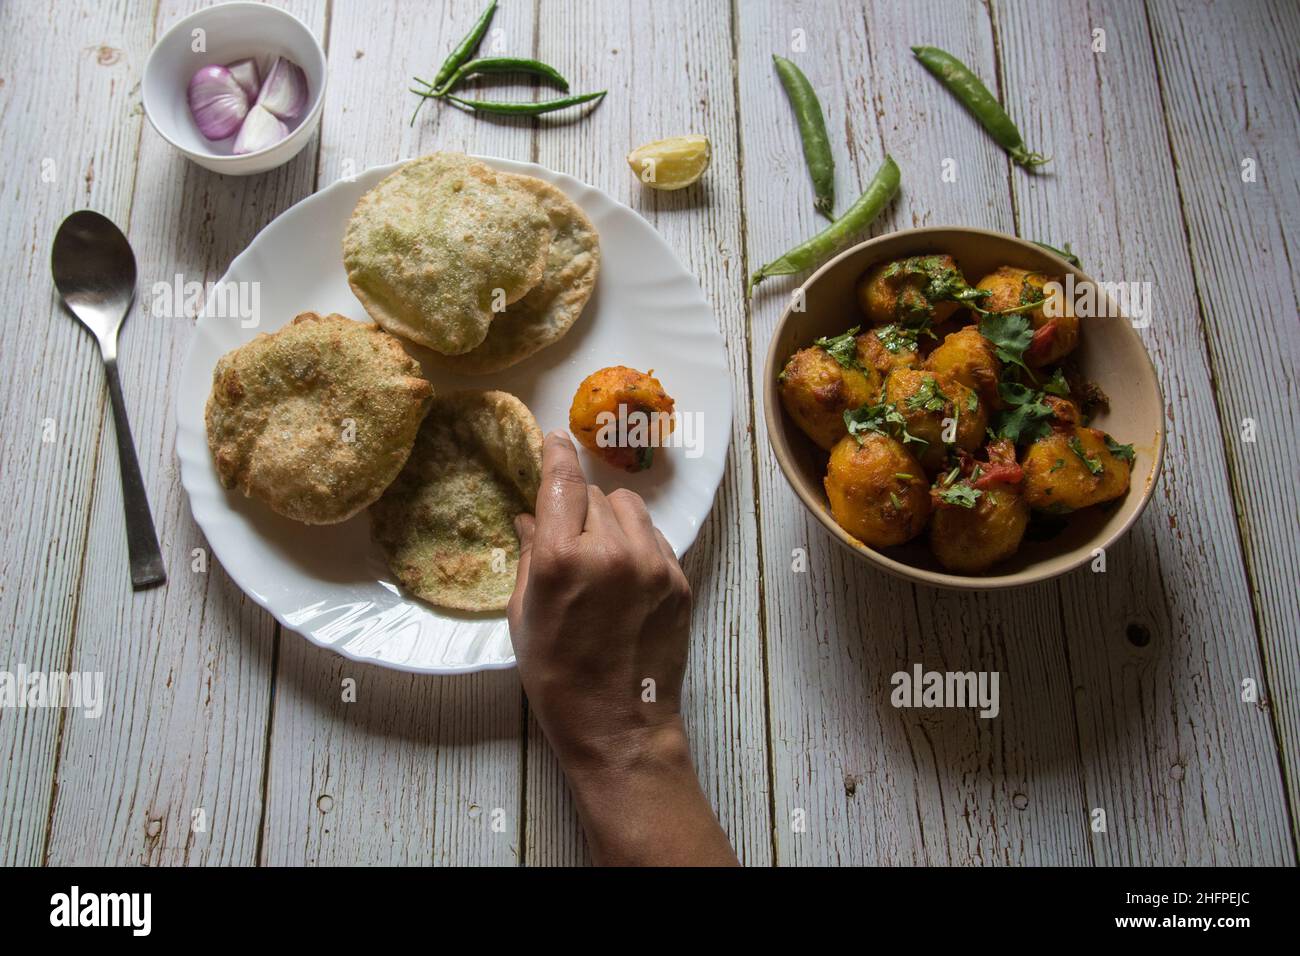 Female hands on food item with use of selective focus Stock Photo